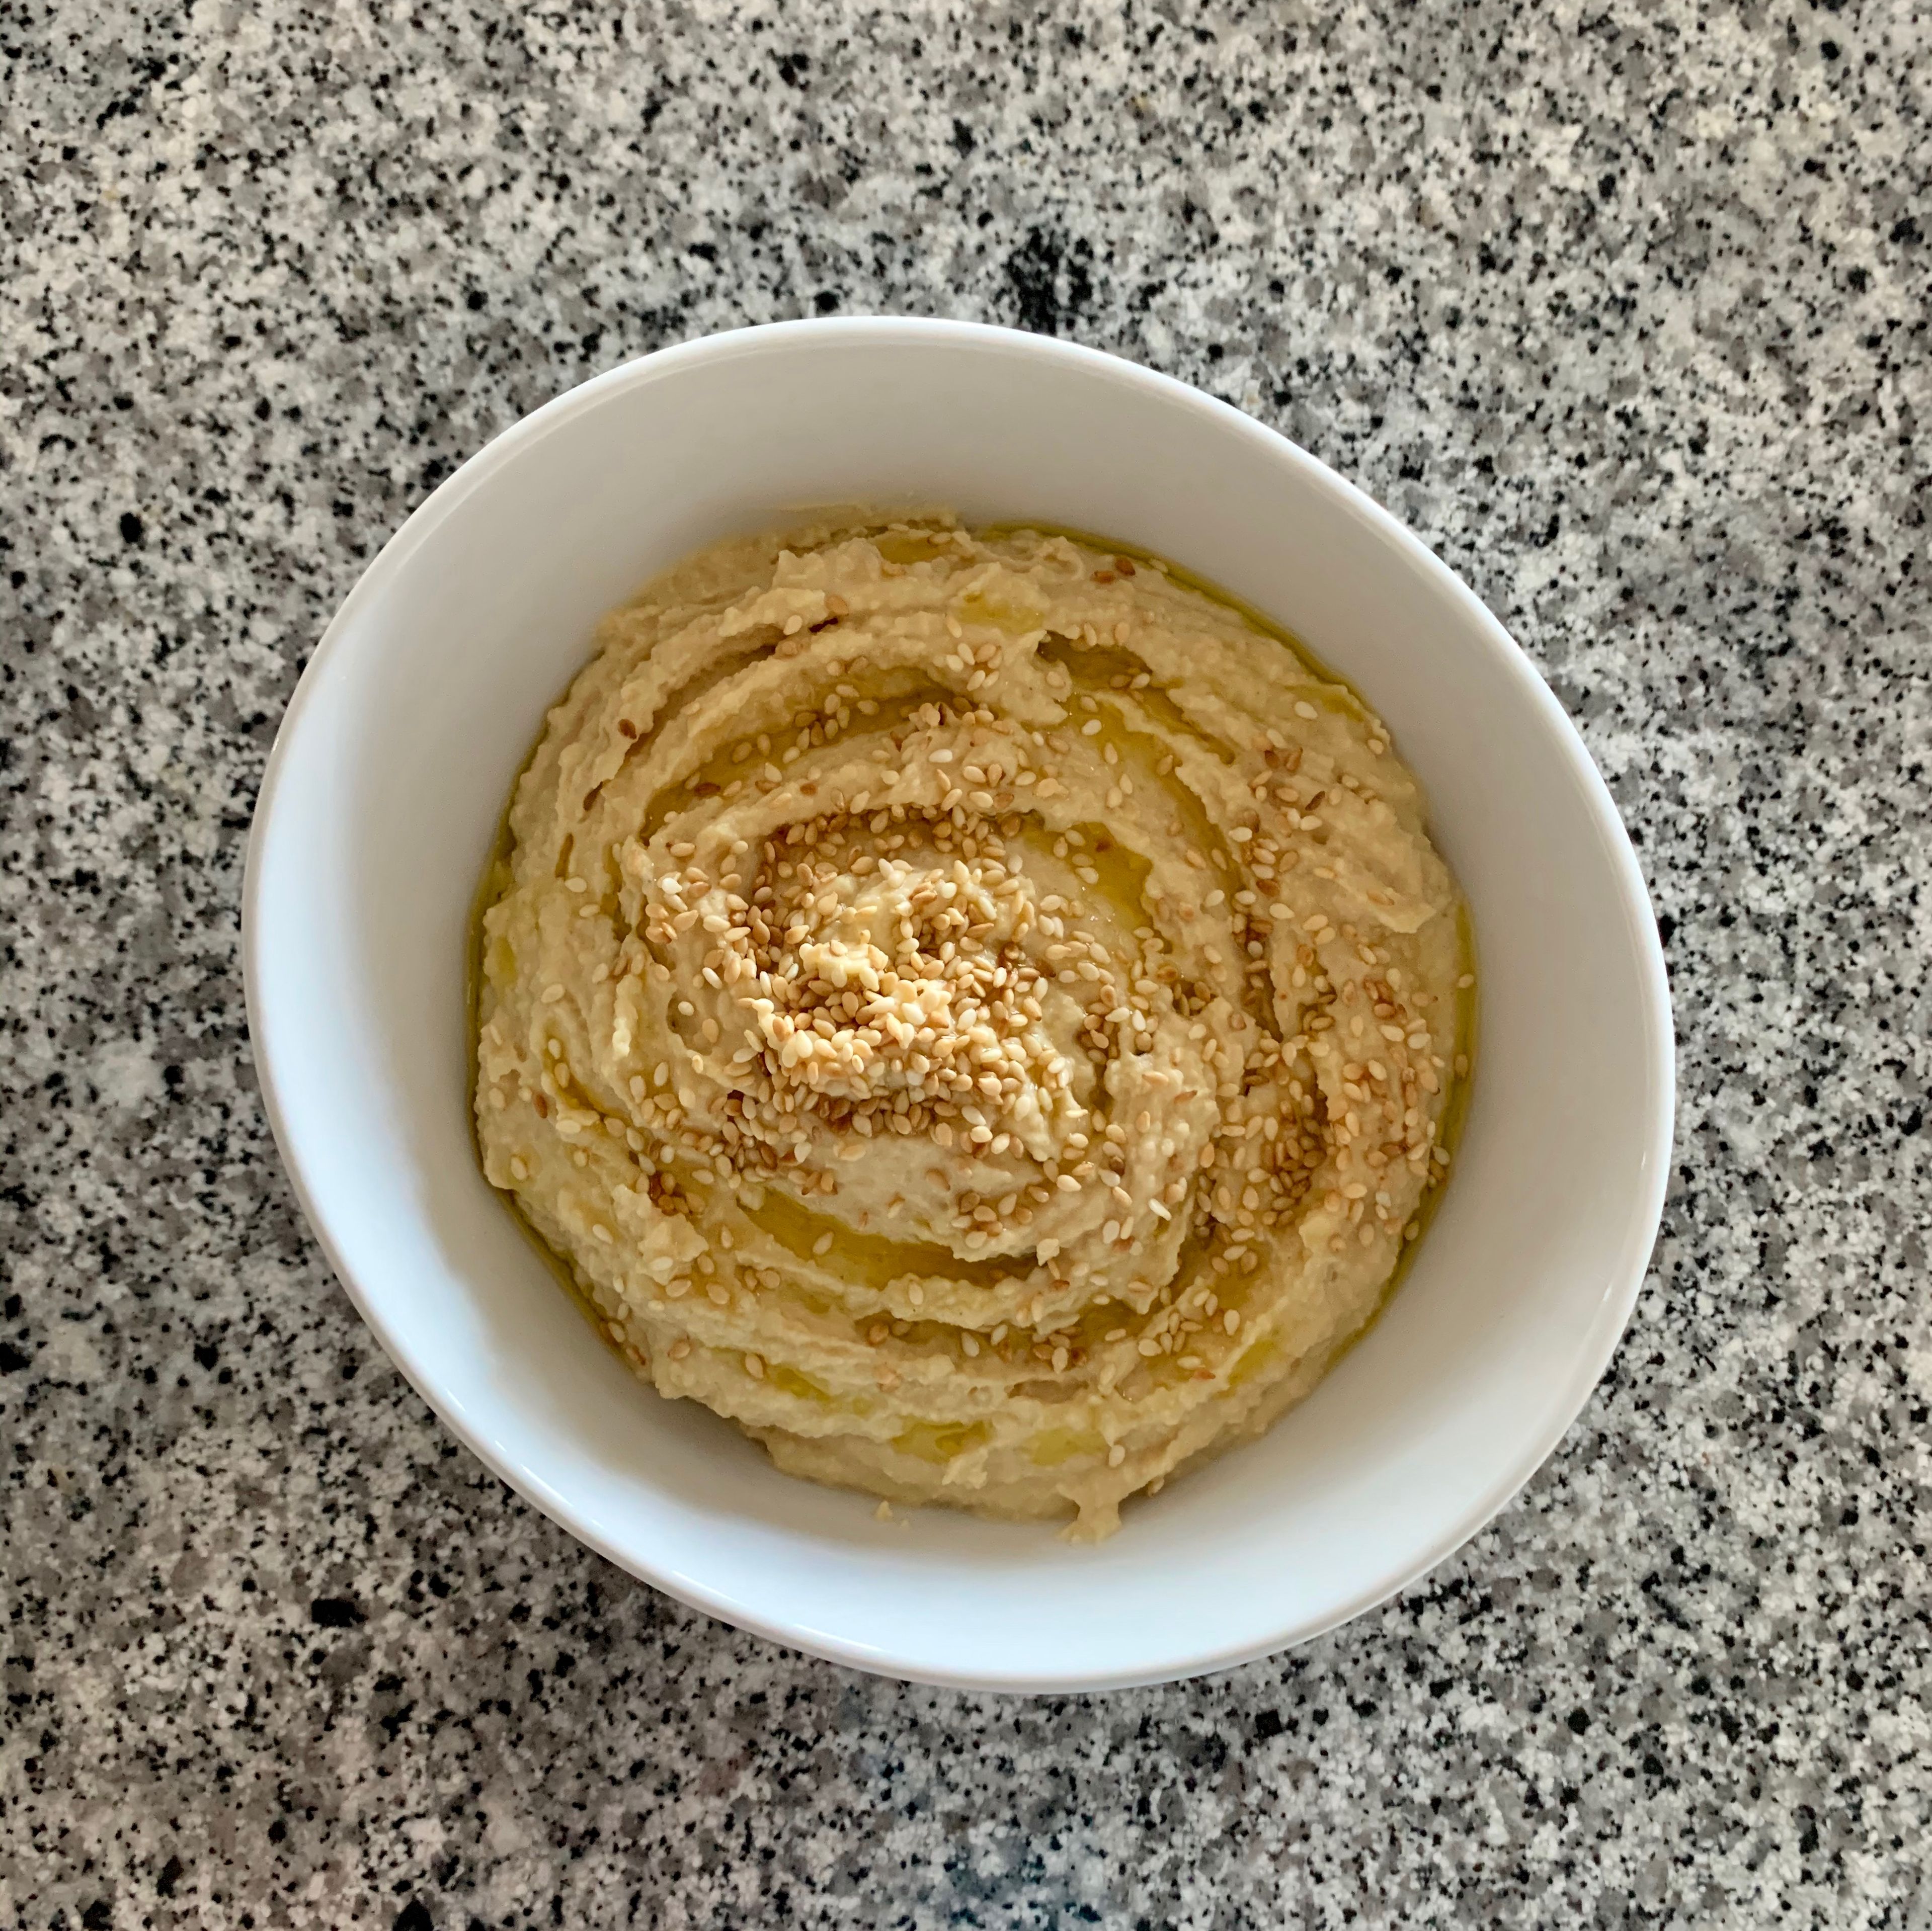 Transfer the hummus to a bowl, serve with a drizzle of olive oil and sprinkle with sesame seeds.